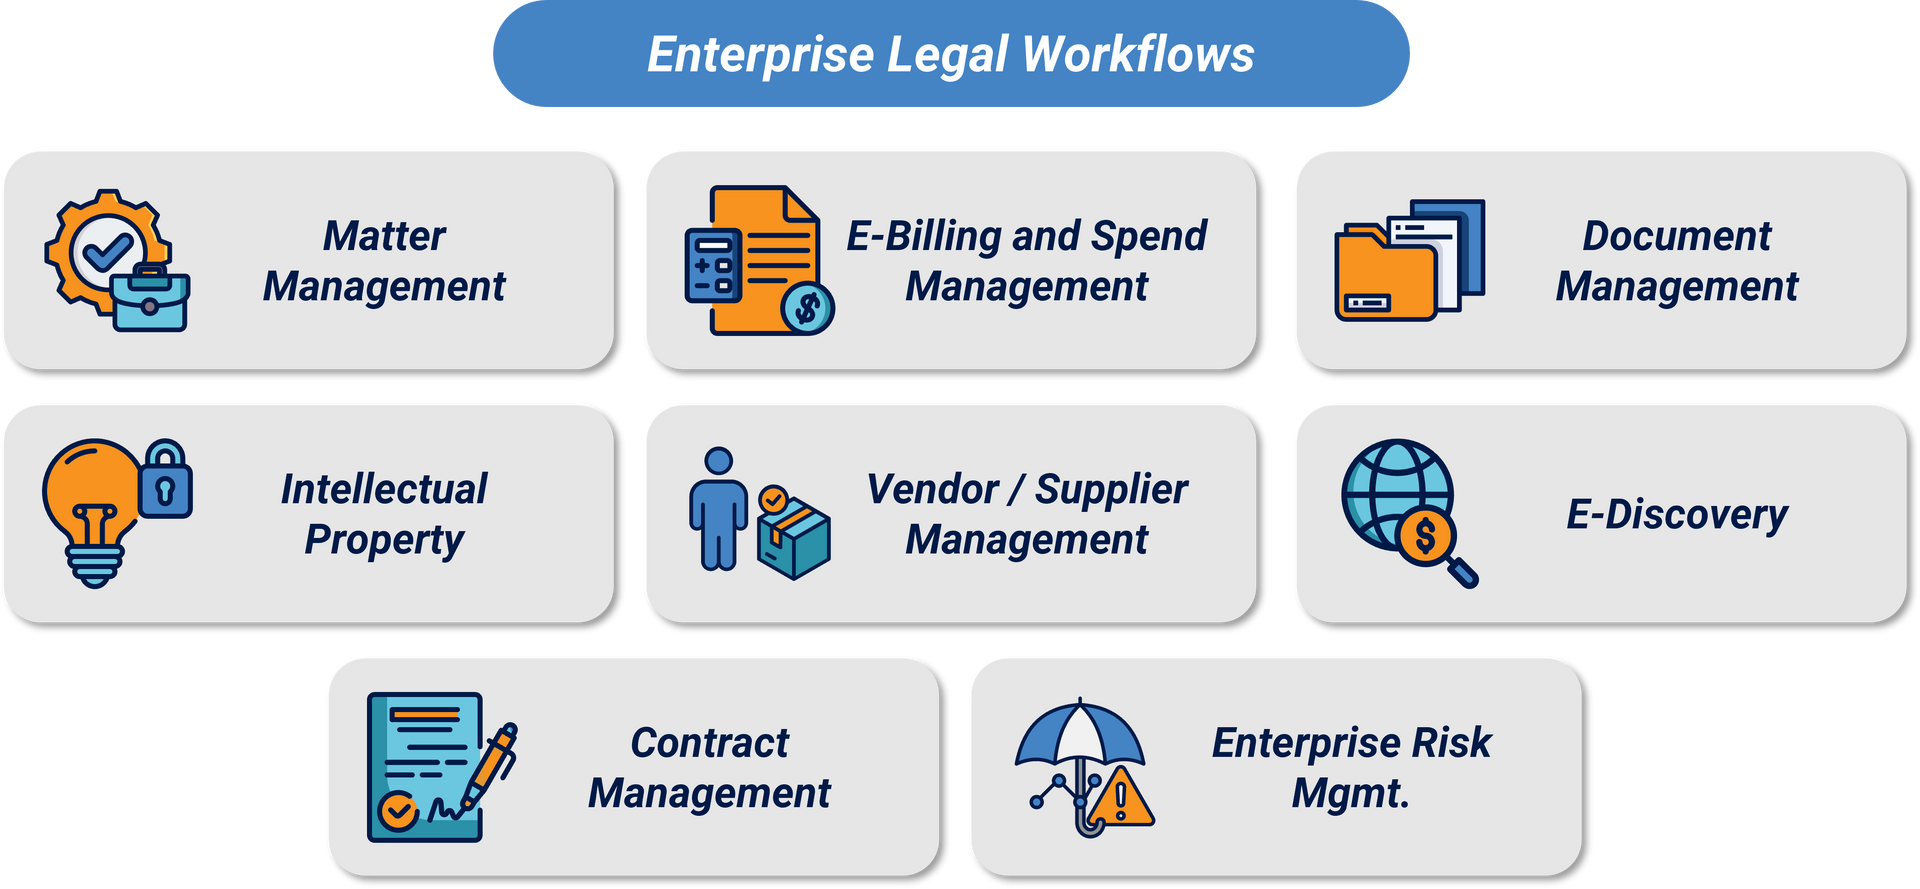 Graphic showing enterprise legal workflows. This includes: matter management, e-billing and spend management, document management, intellectual property management, vendor/supplier management, e-discovery, contract management, enterprise risk management.